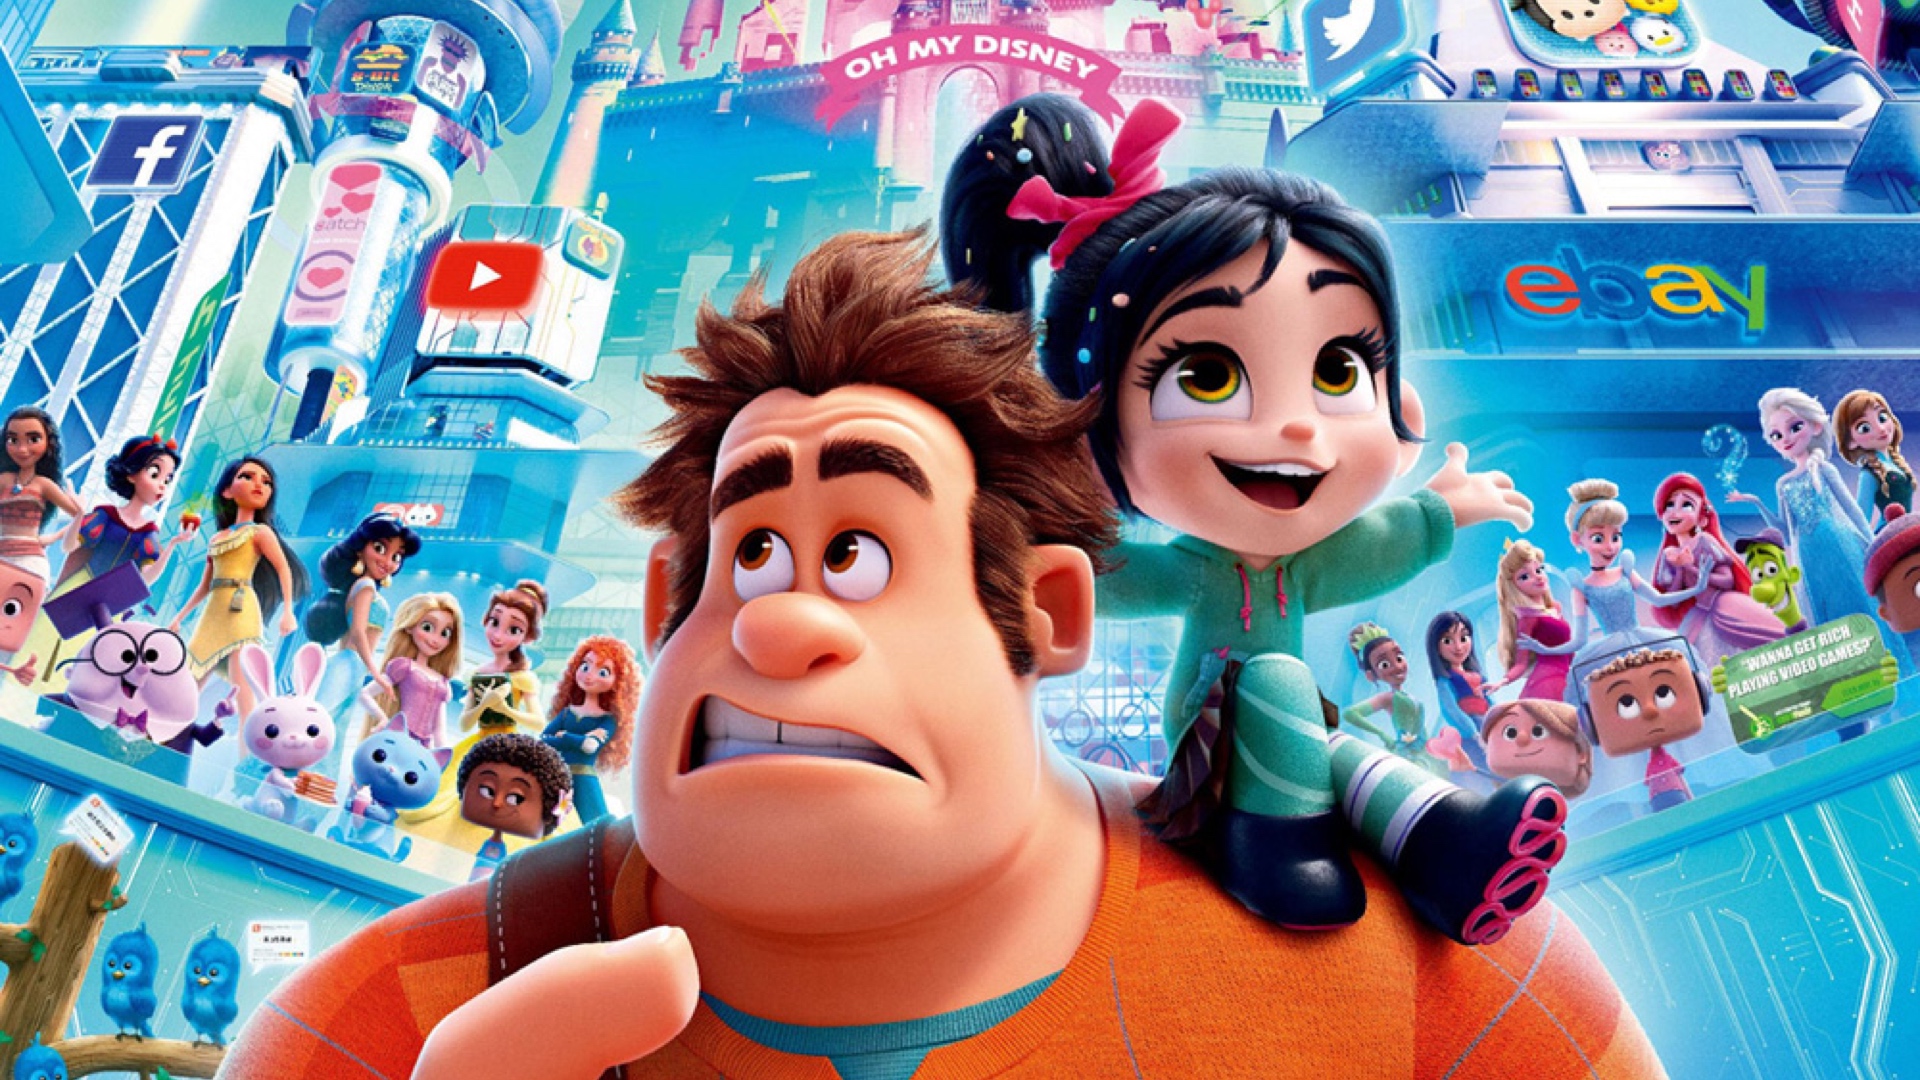 Ralph Breaks the Internet - A nice trip to the heart of the Internet.